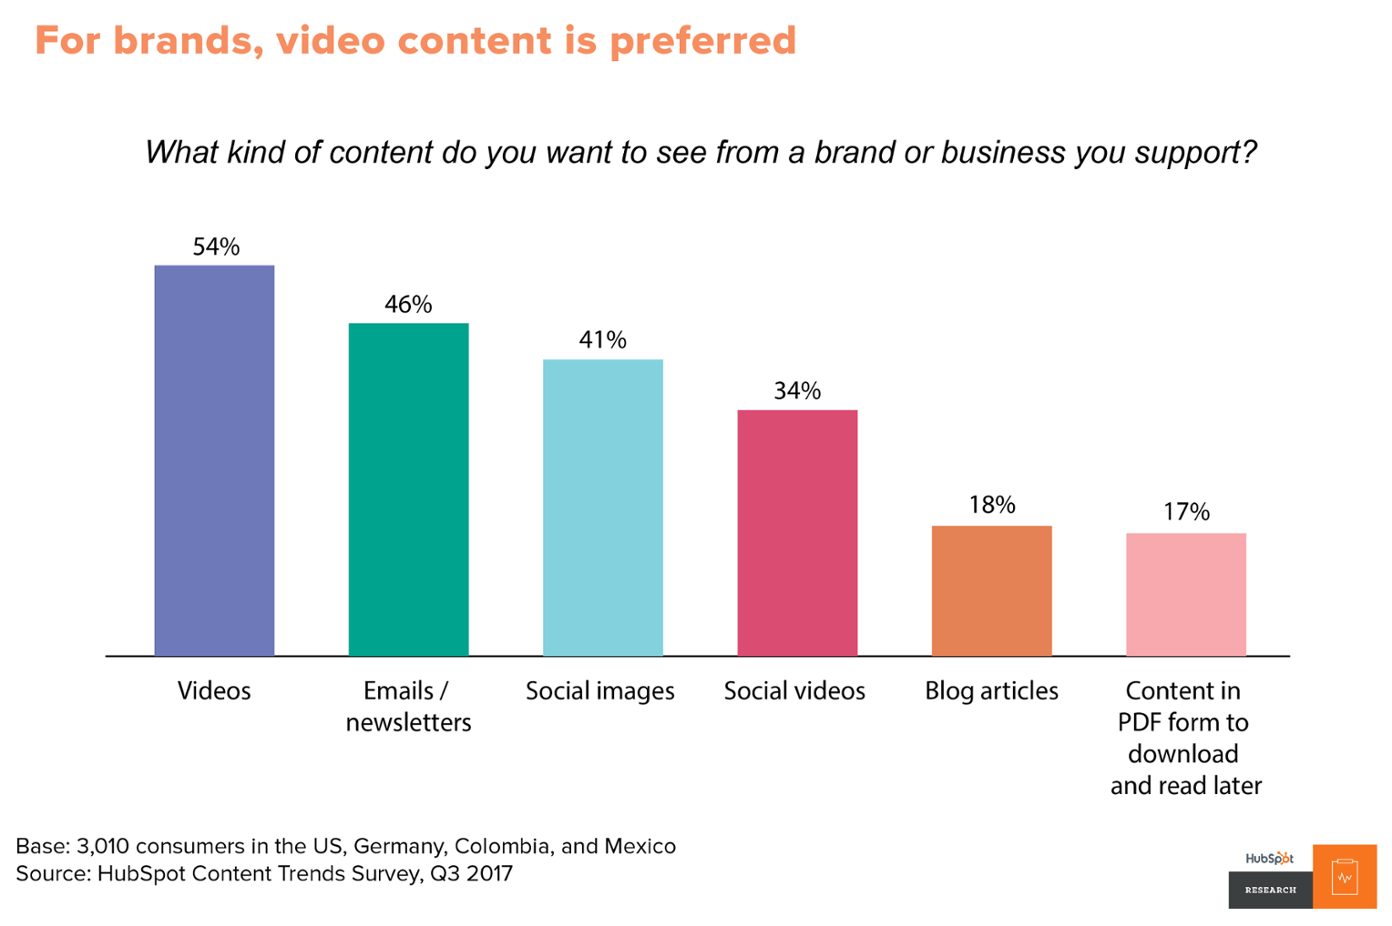 54% of consumers want to see videos from brands they support